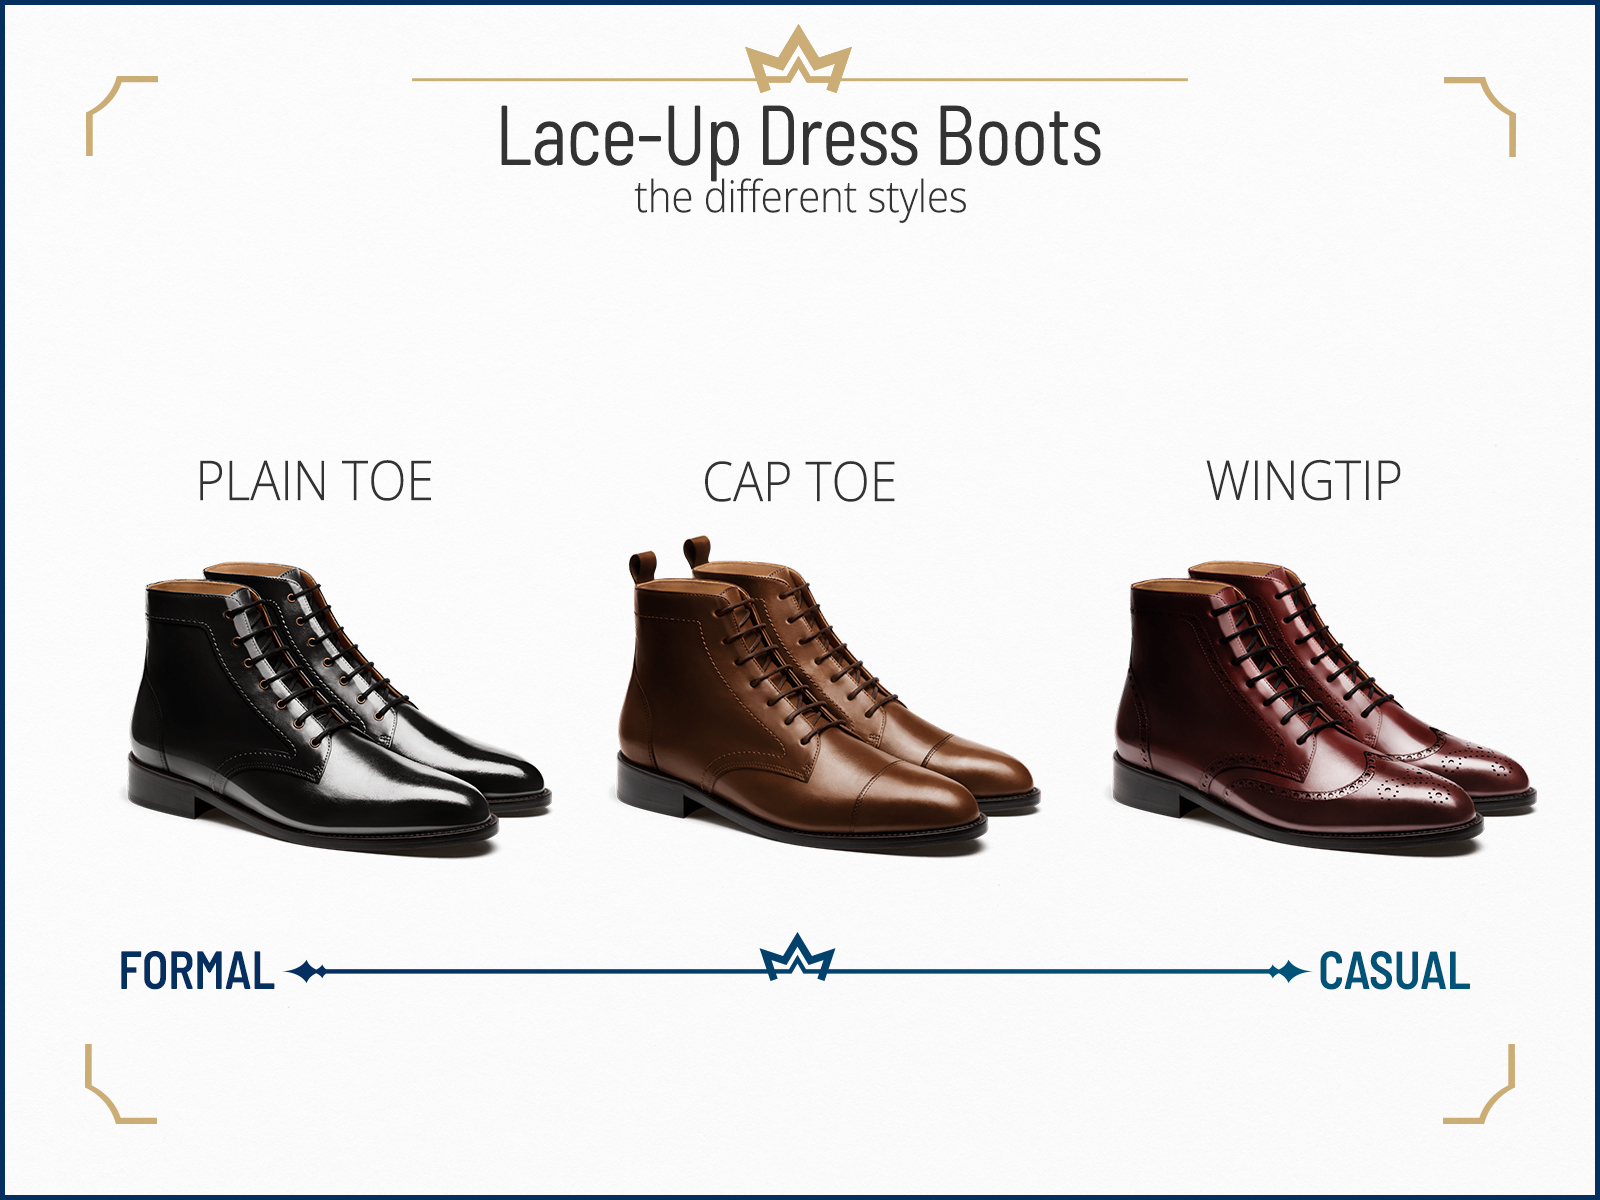 Lace-up dress boots types by formality